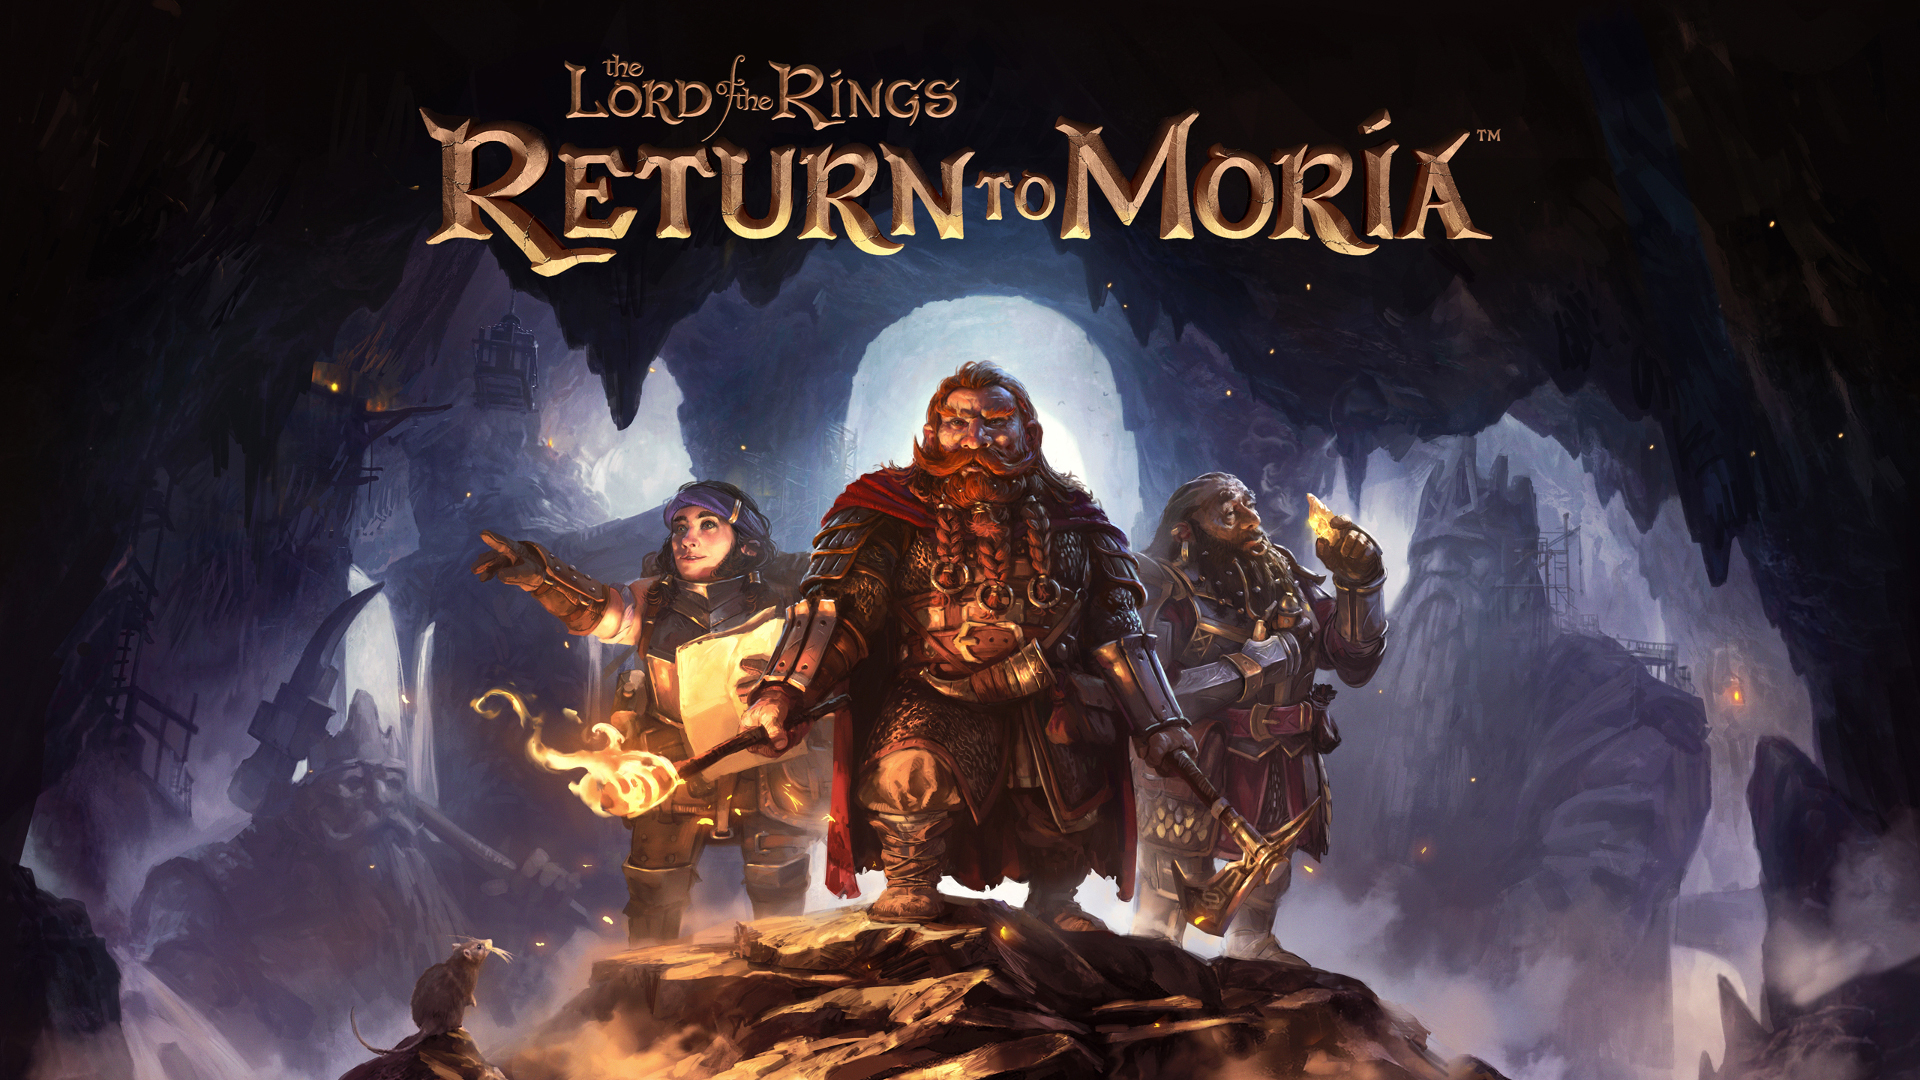 Return To Moria The Lord of The Rings Release date, gameplay details